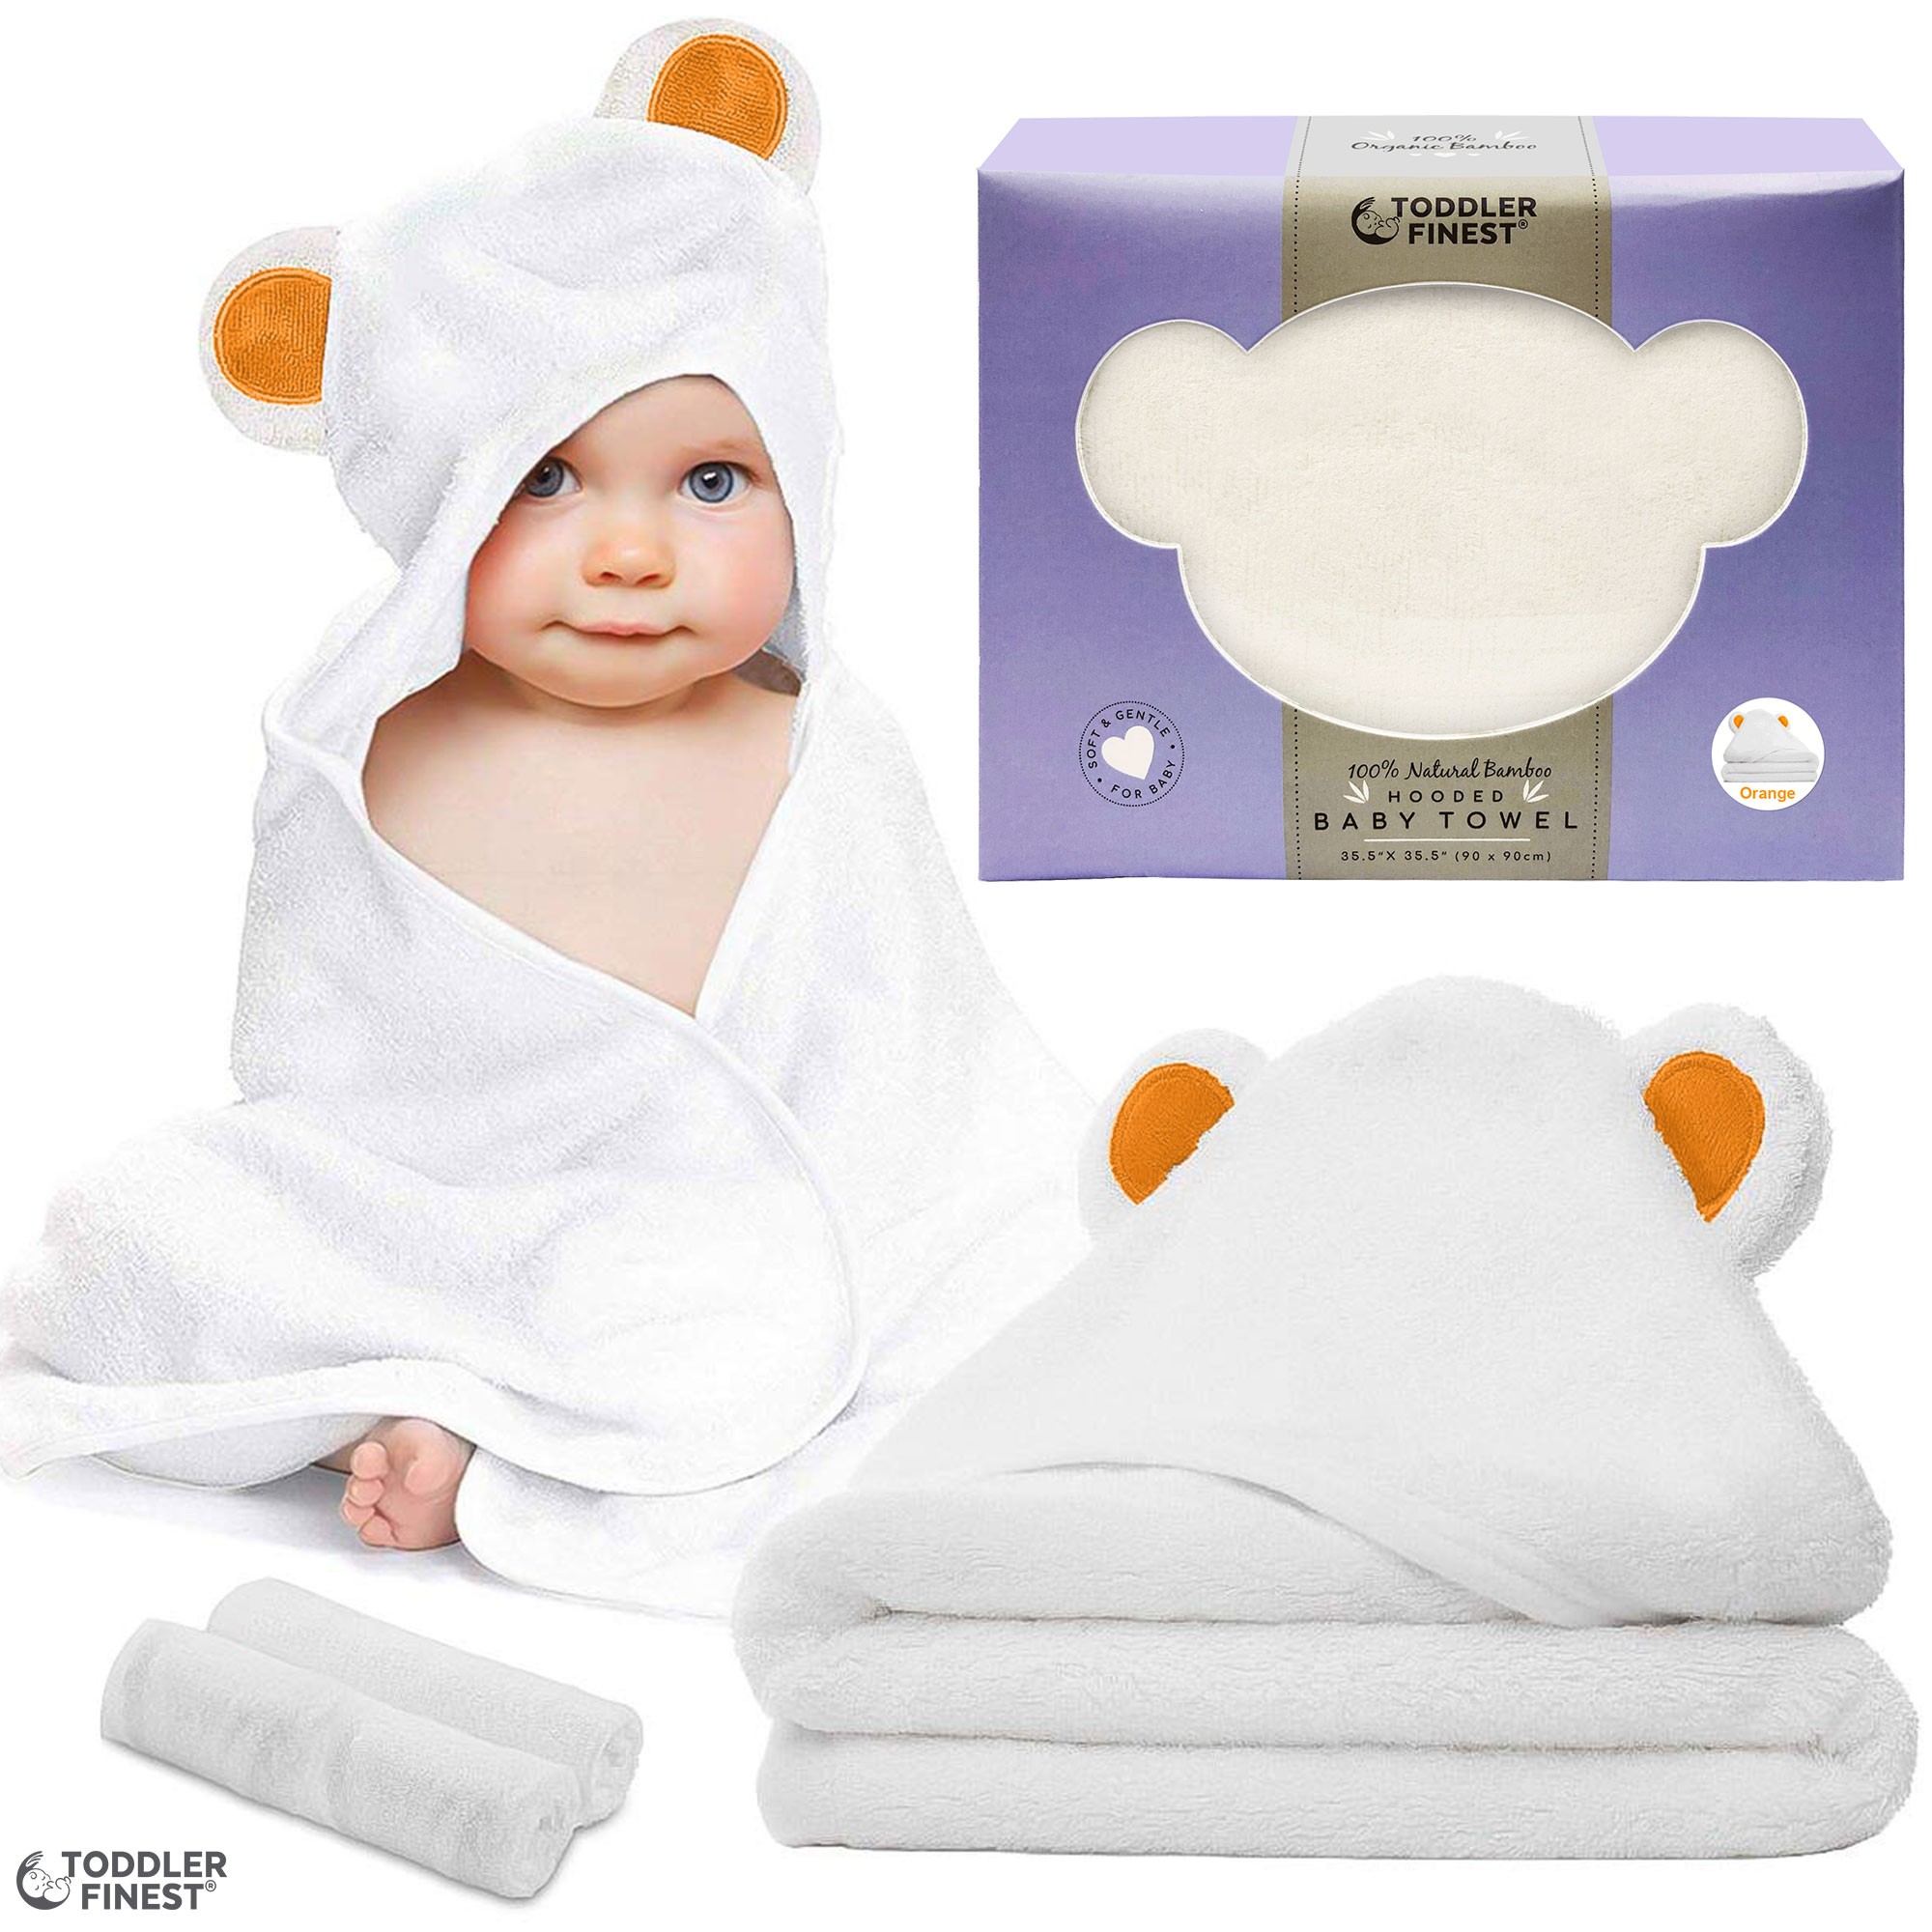 Extra Soft & Thick 500 GSM Bamboo Terry Extra Large Toddler to Kids Bath Towel with Hood for Boys & Girls After Beach or Swim Hypoallergenic & Eco-Friendly Pool Kids Hooded Bath Towel 